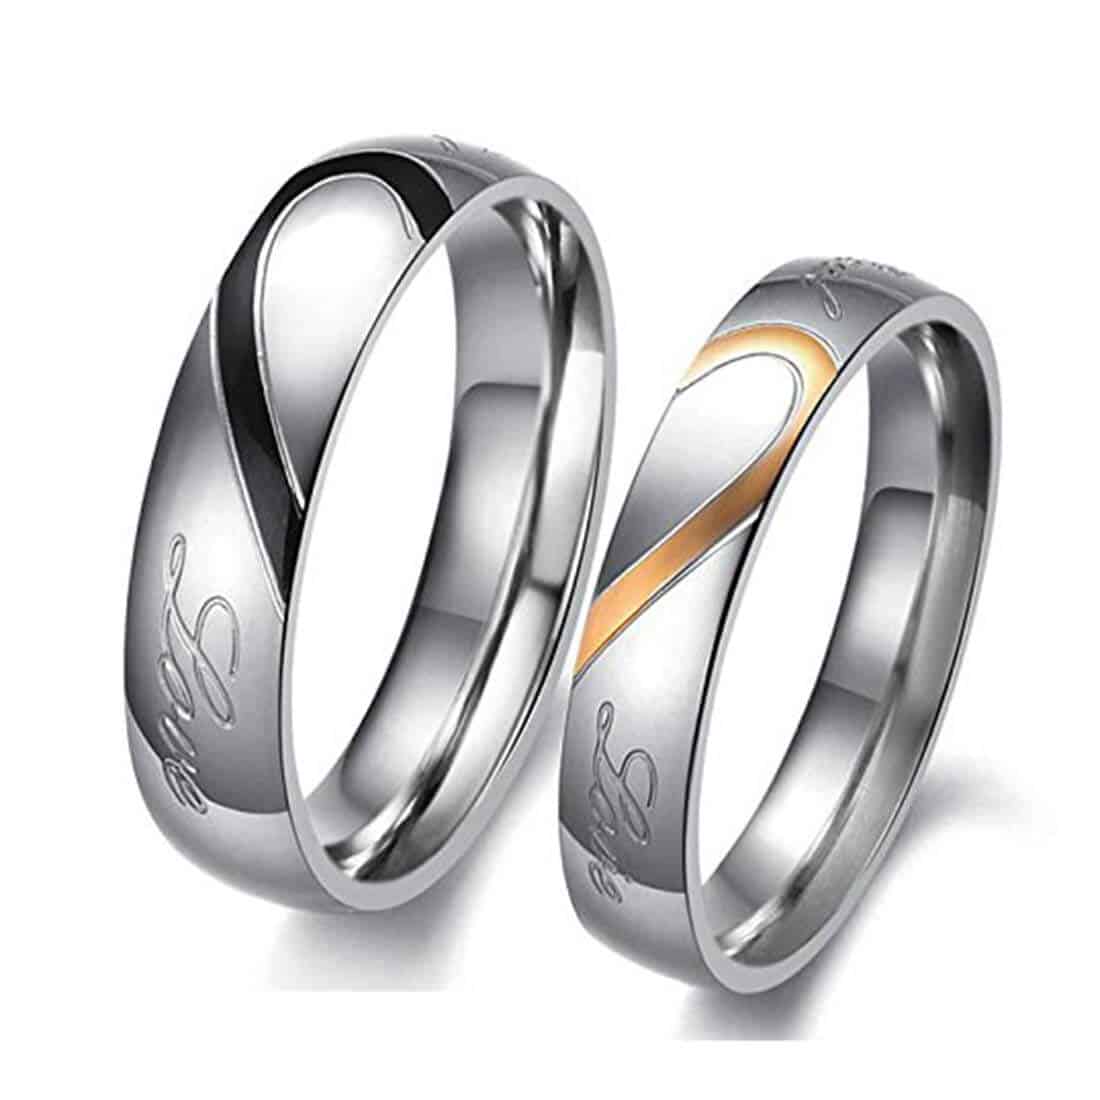 Buy Banemi Matching Rings, I Love You Wedding Ring Men and Women Promise  Ring Sets for Couples Stainless Steel Rings, No Gemstone at Amazon.in